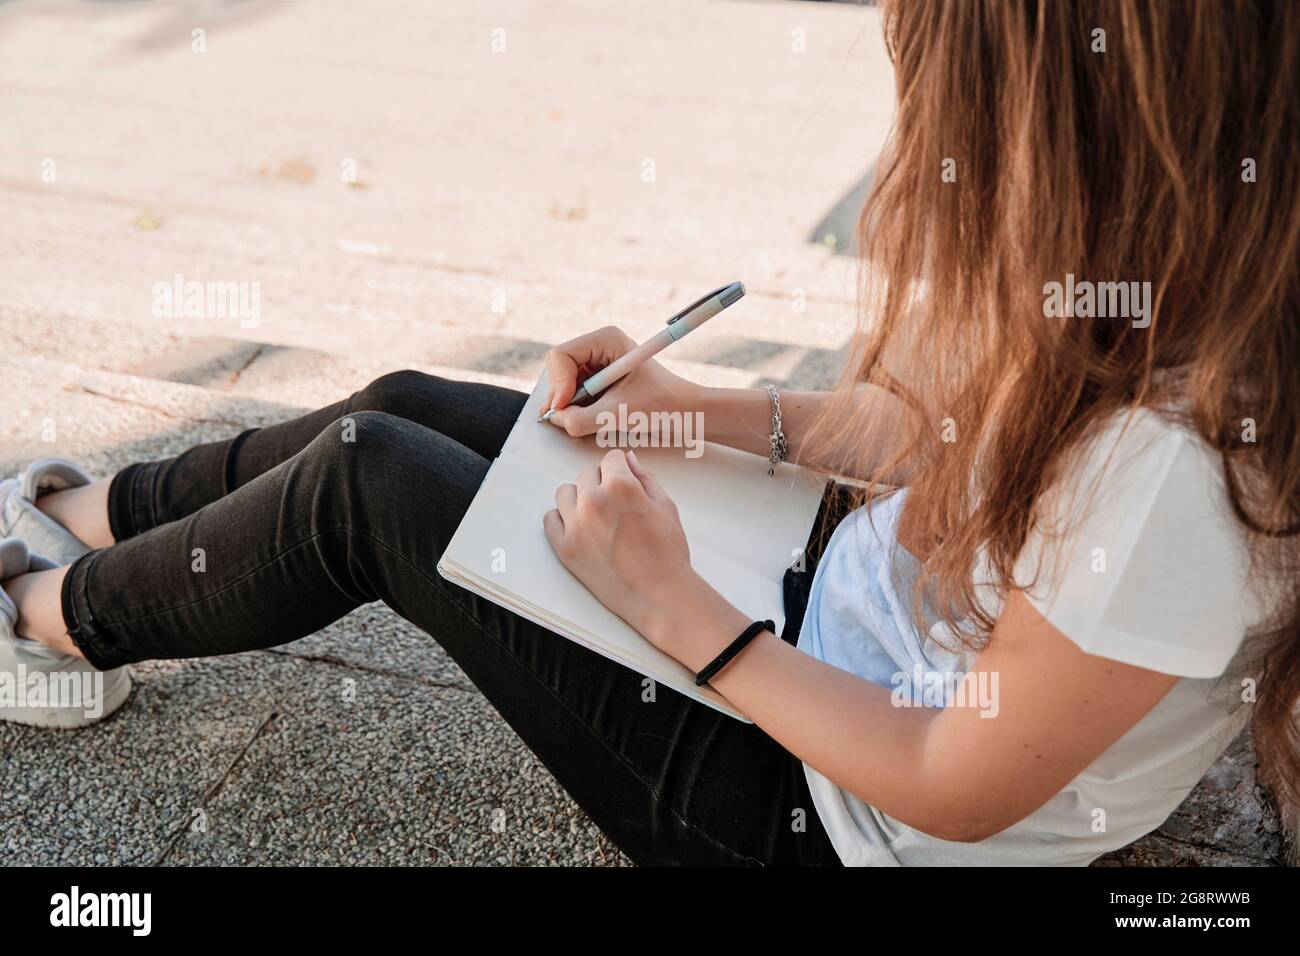 Unrecognizable woman sitting on stairs on a sunny day studying outdoors. Concept of education Stock Photo